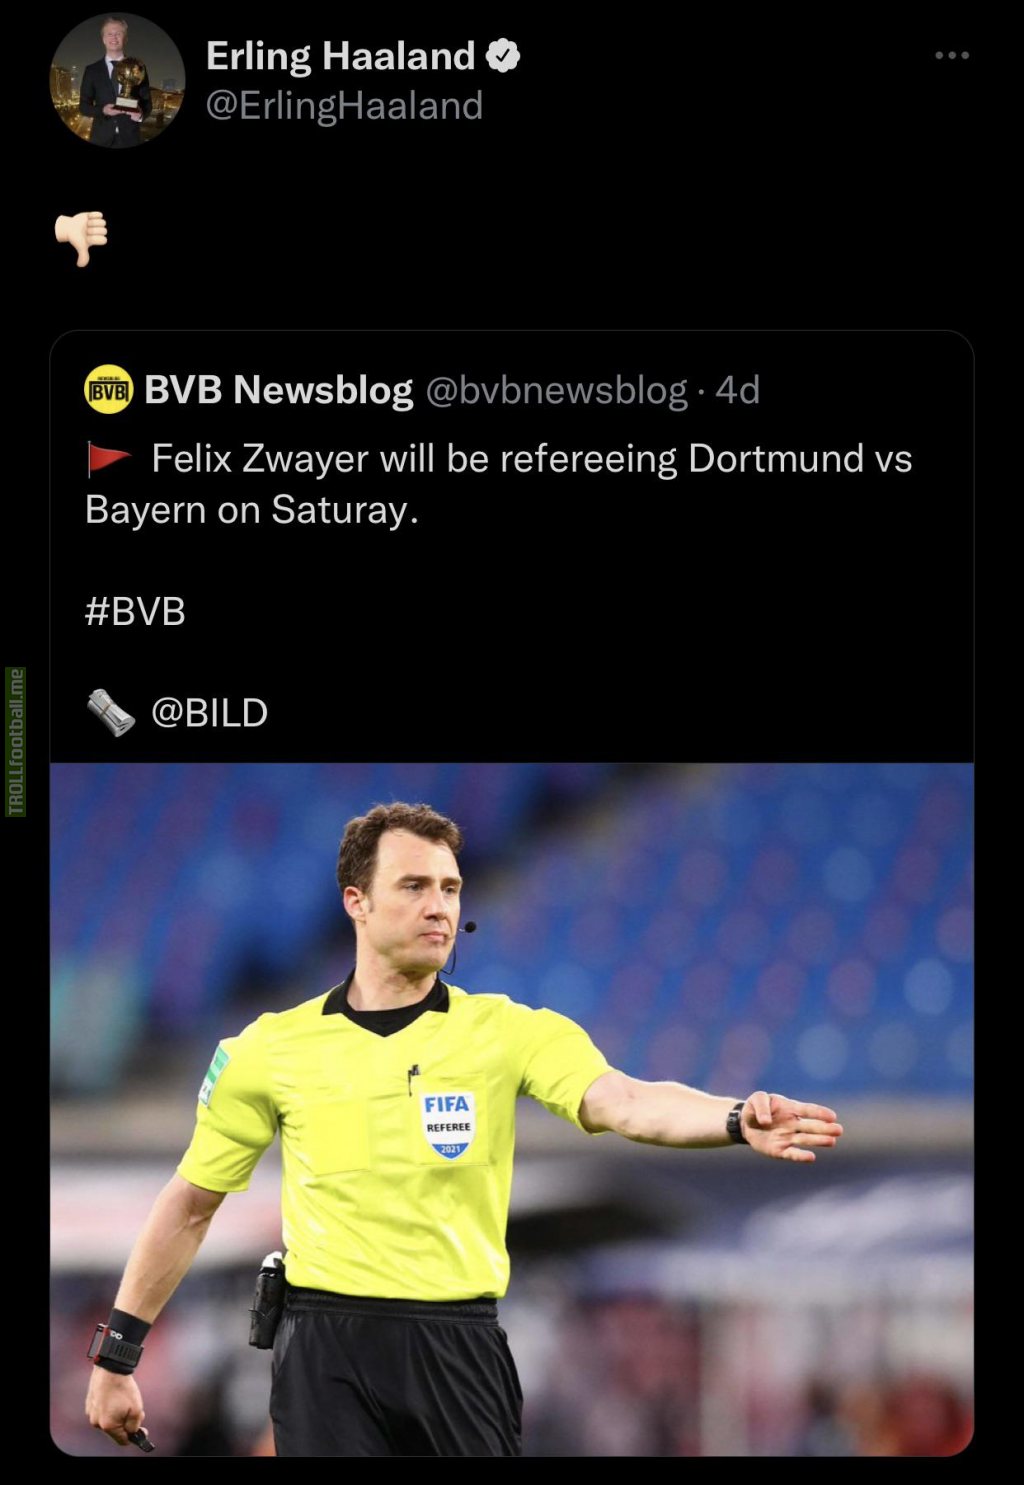 Erling Haaland on Twitter after Felix Zwayer's controversial performance as referee during Dortmund vs. Bayern